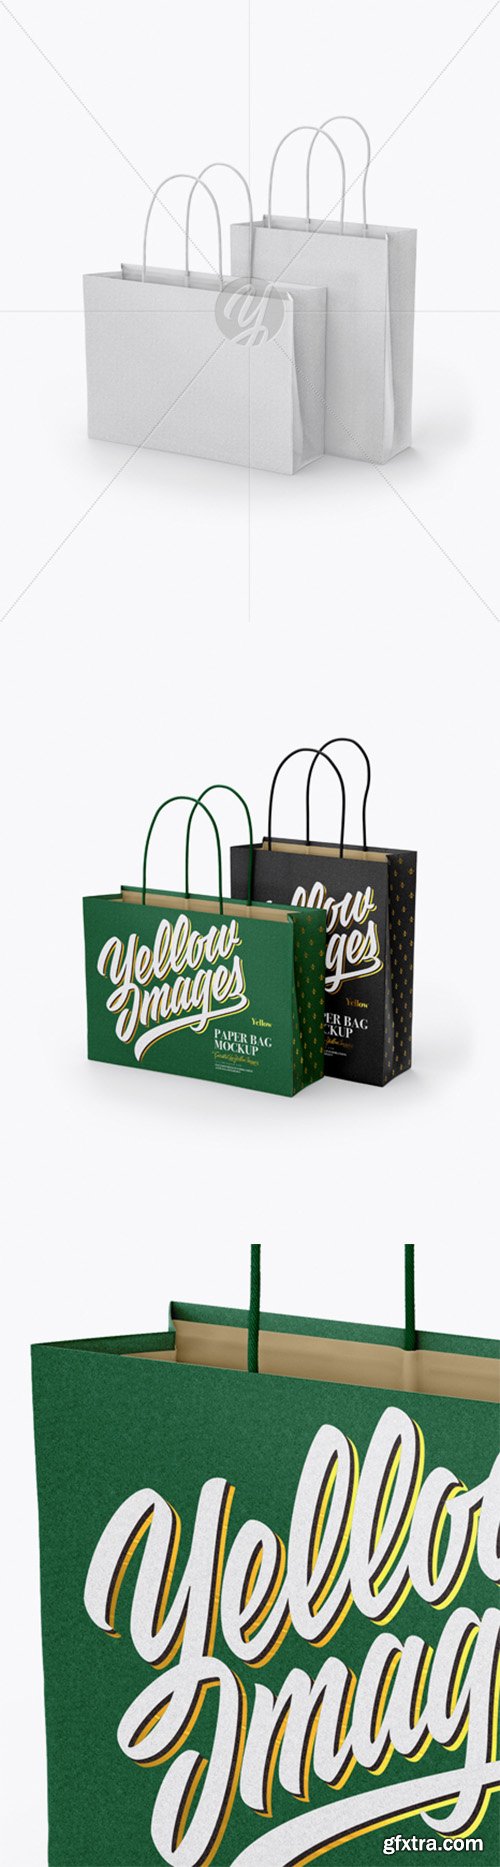 Two Paper Bags Mockup - Half Side View 27690